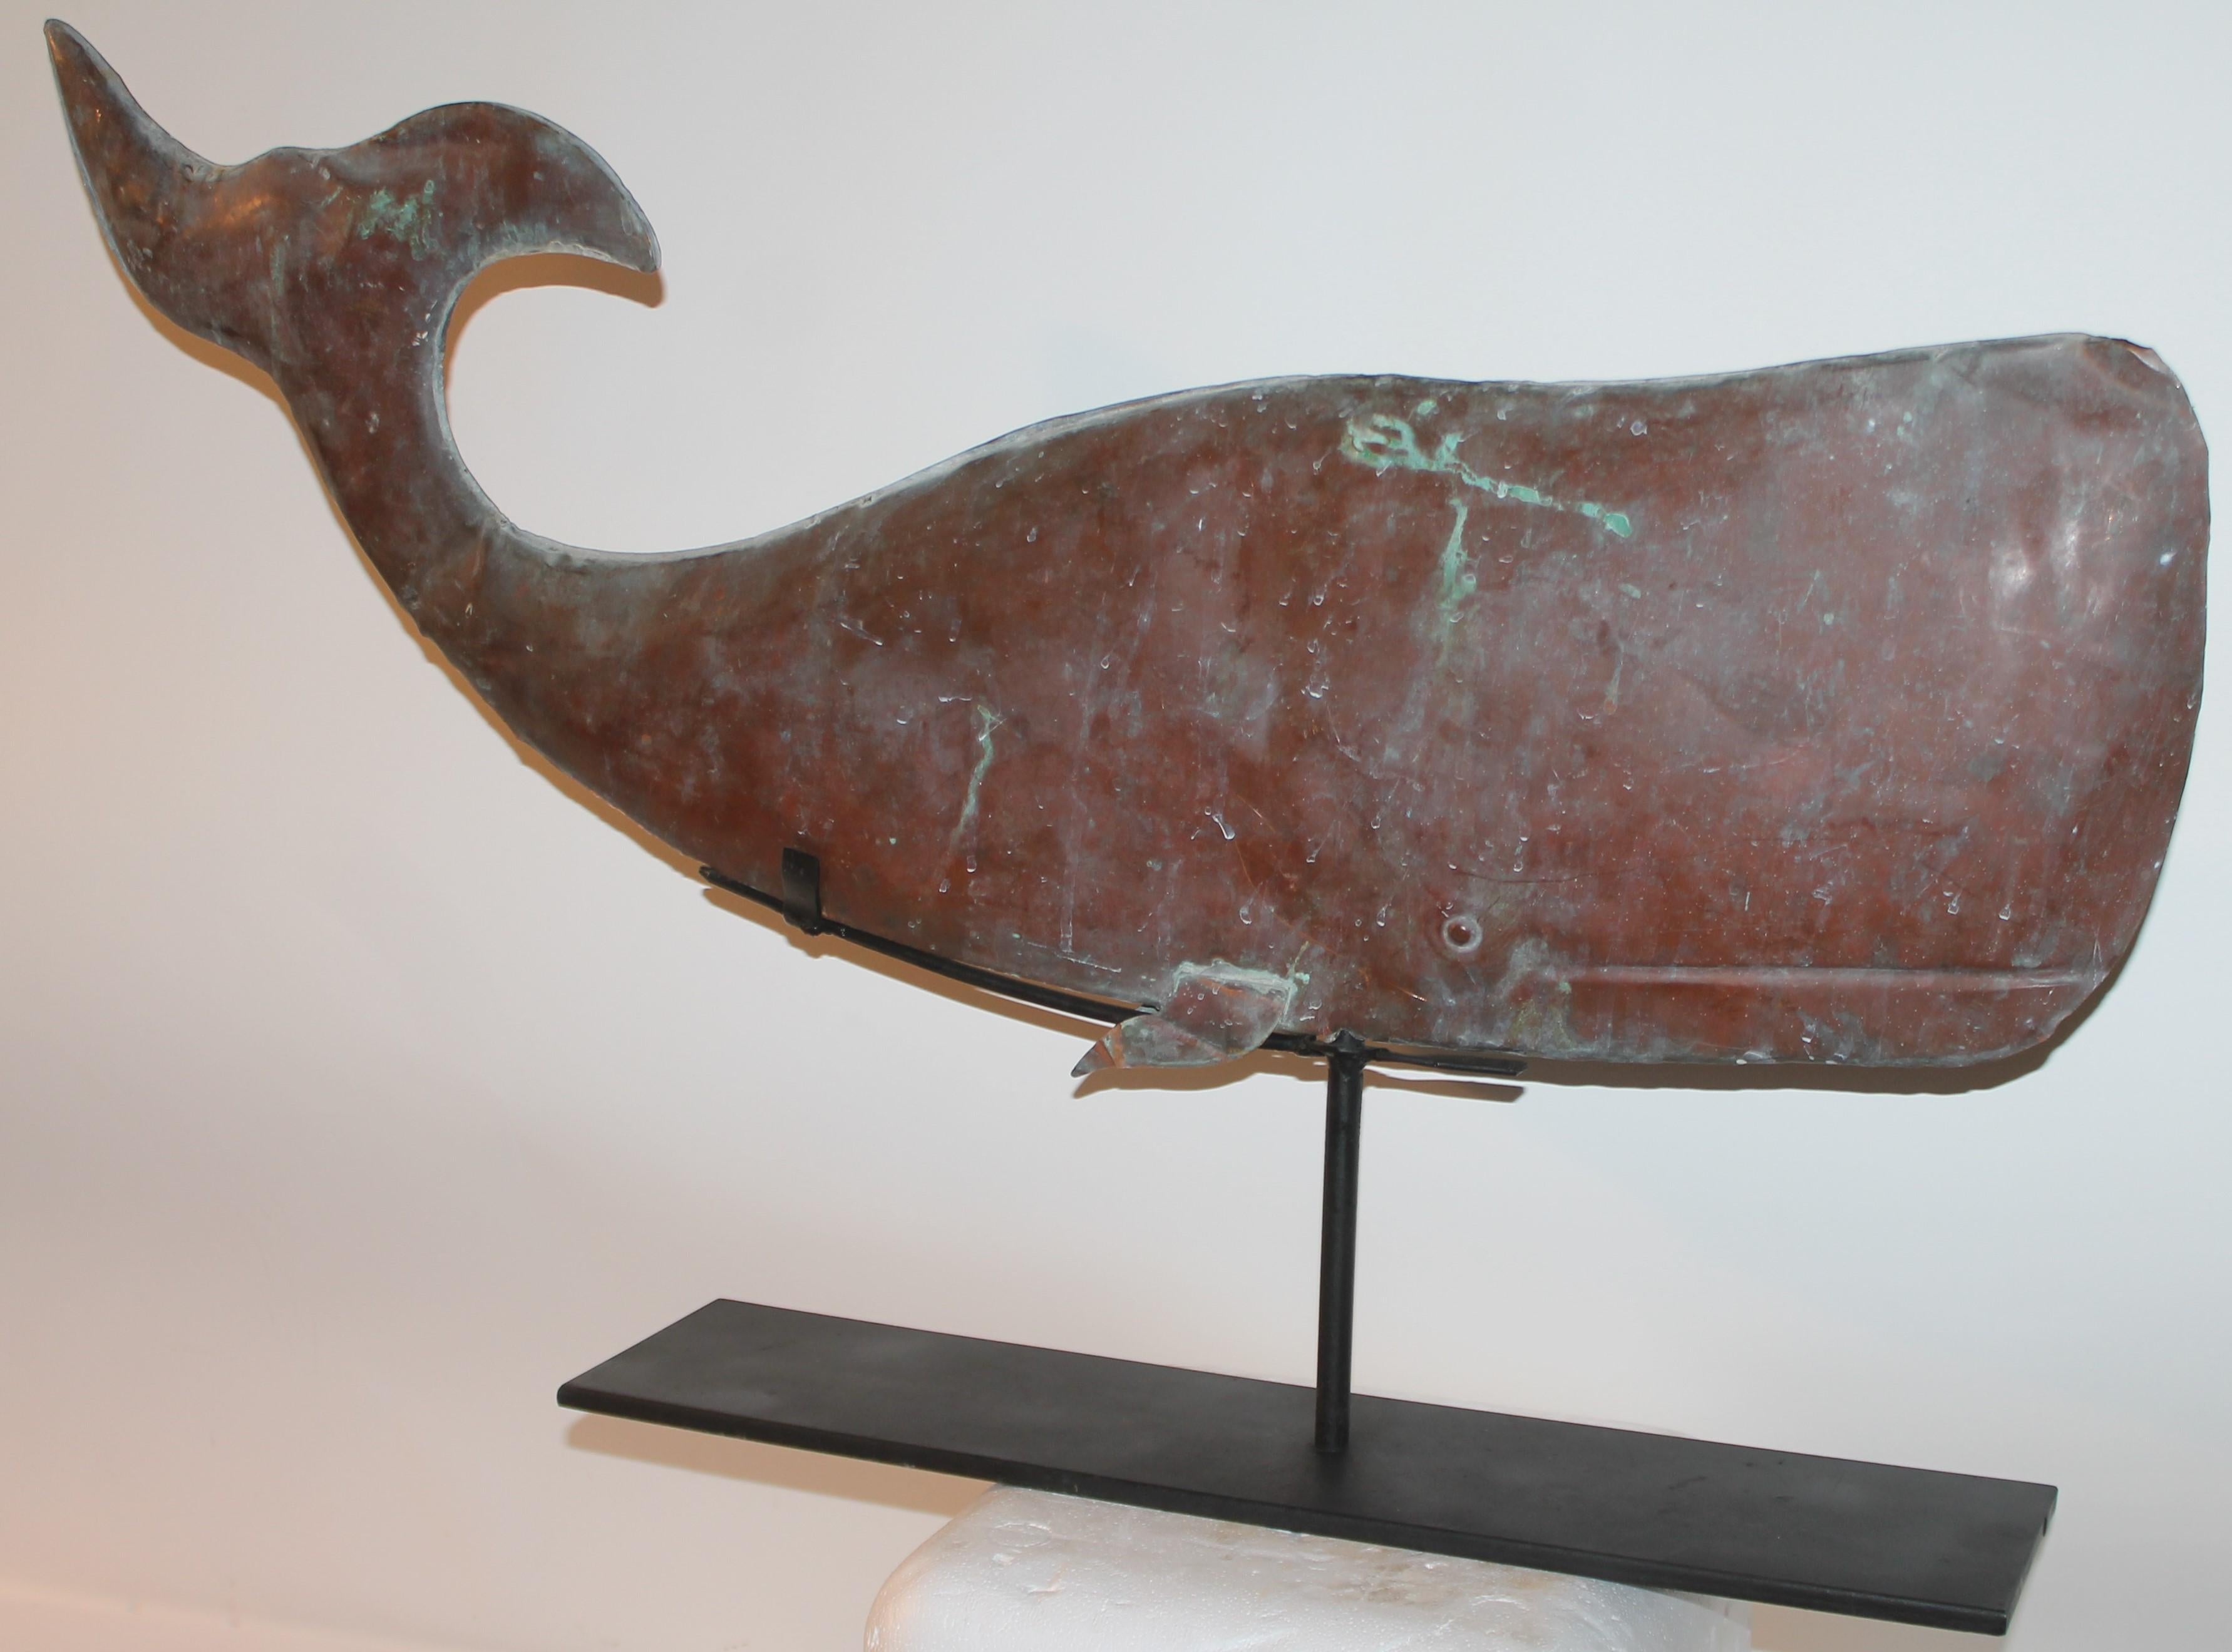 1930's oversized whale weathervane with amazing copper patina.